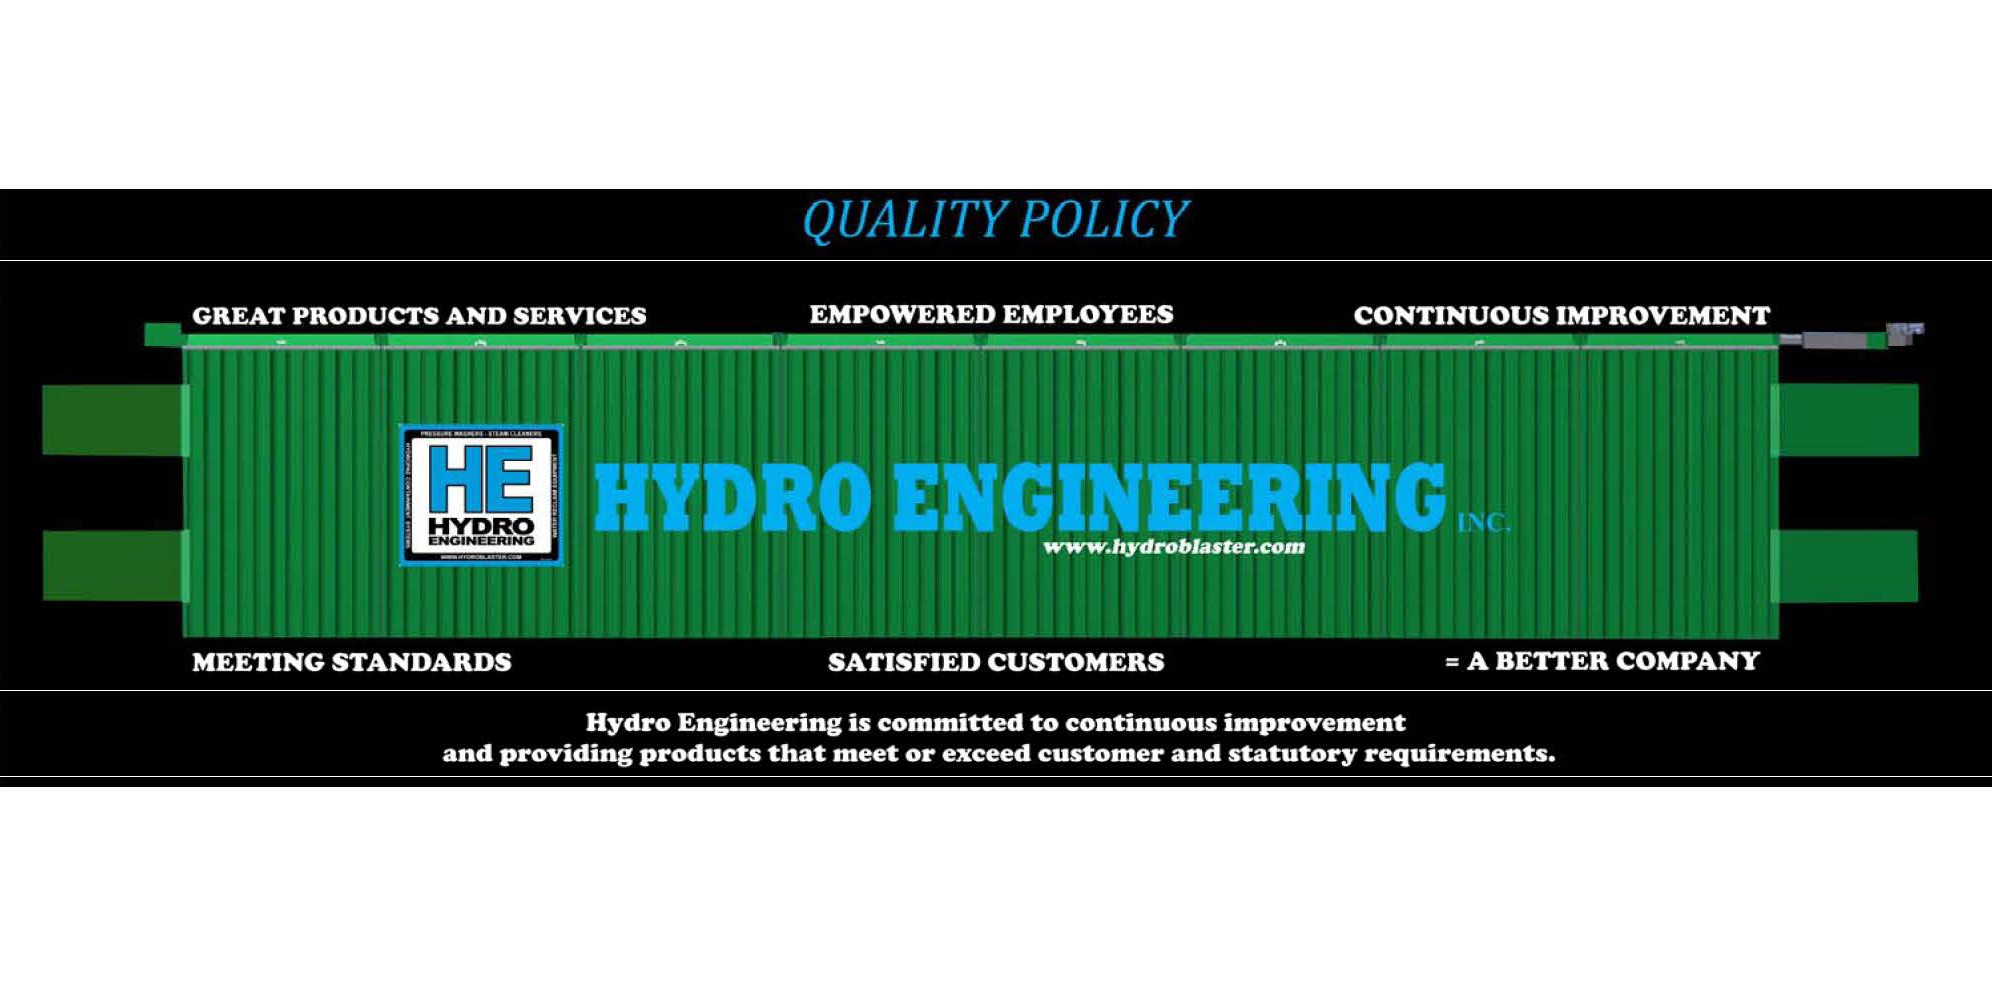 Hydro Engineering Quality Policy